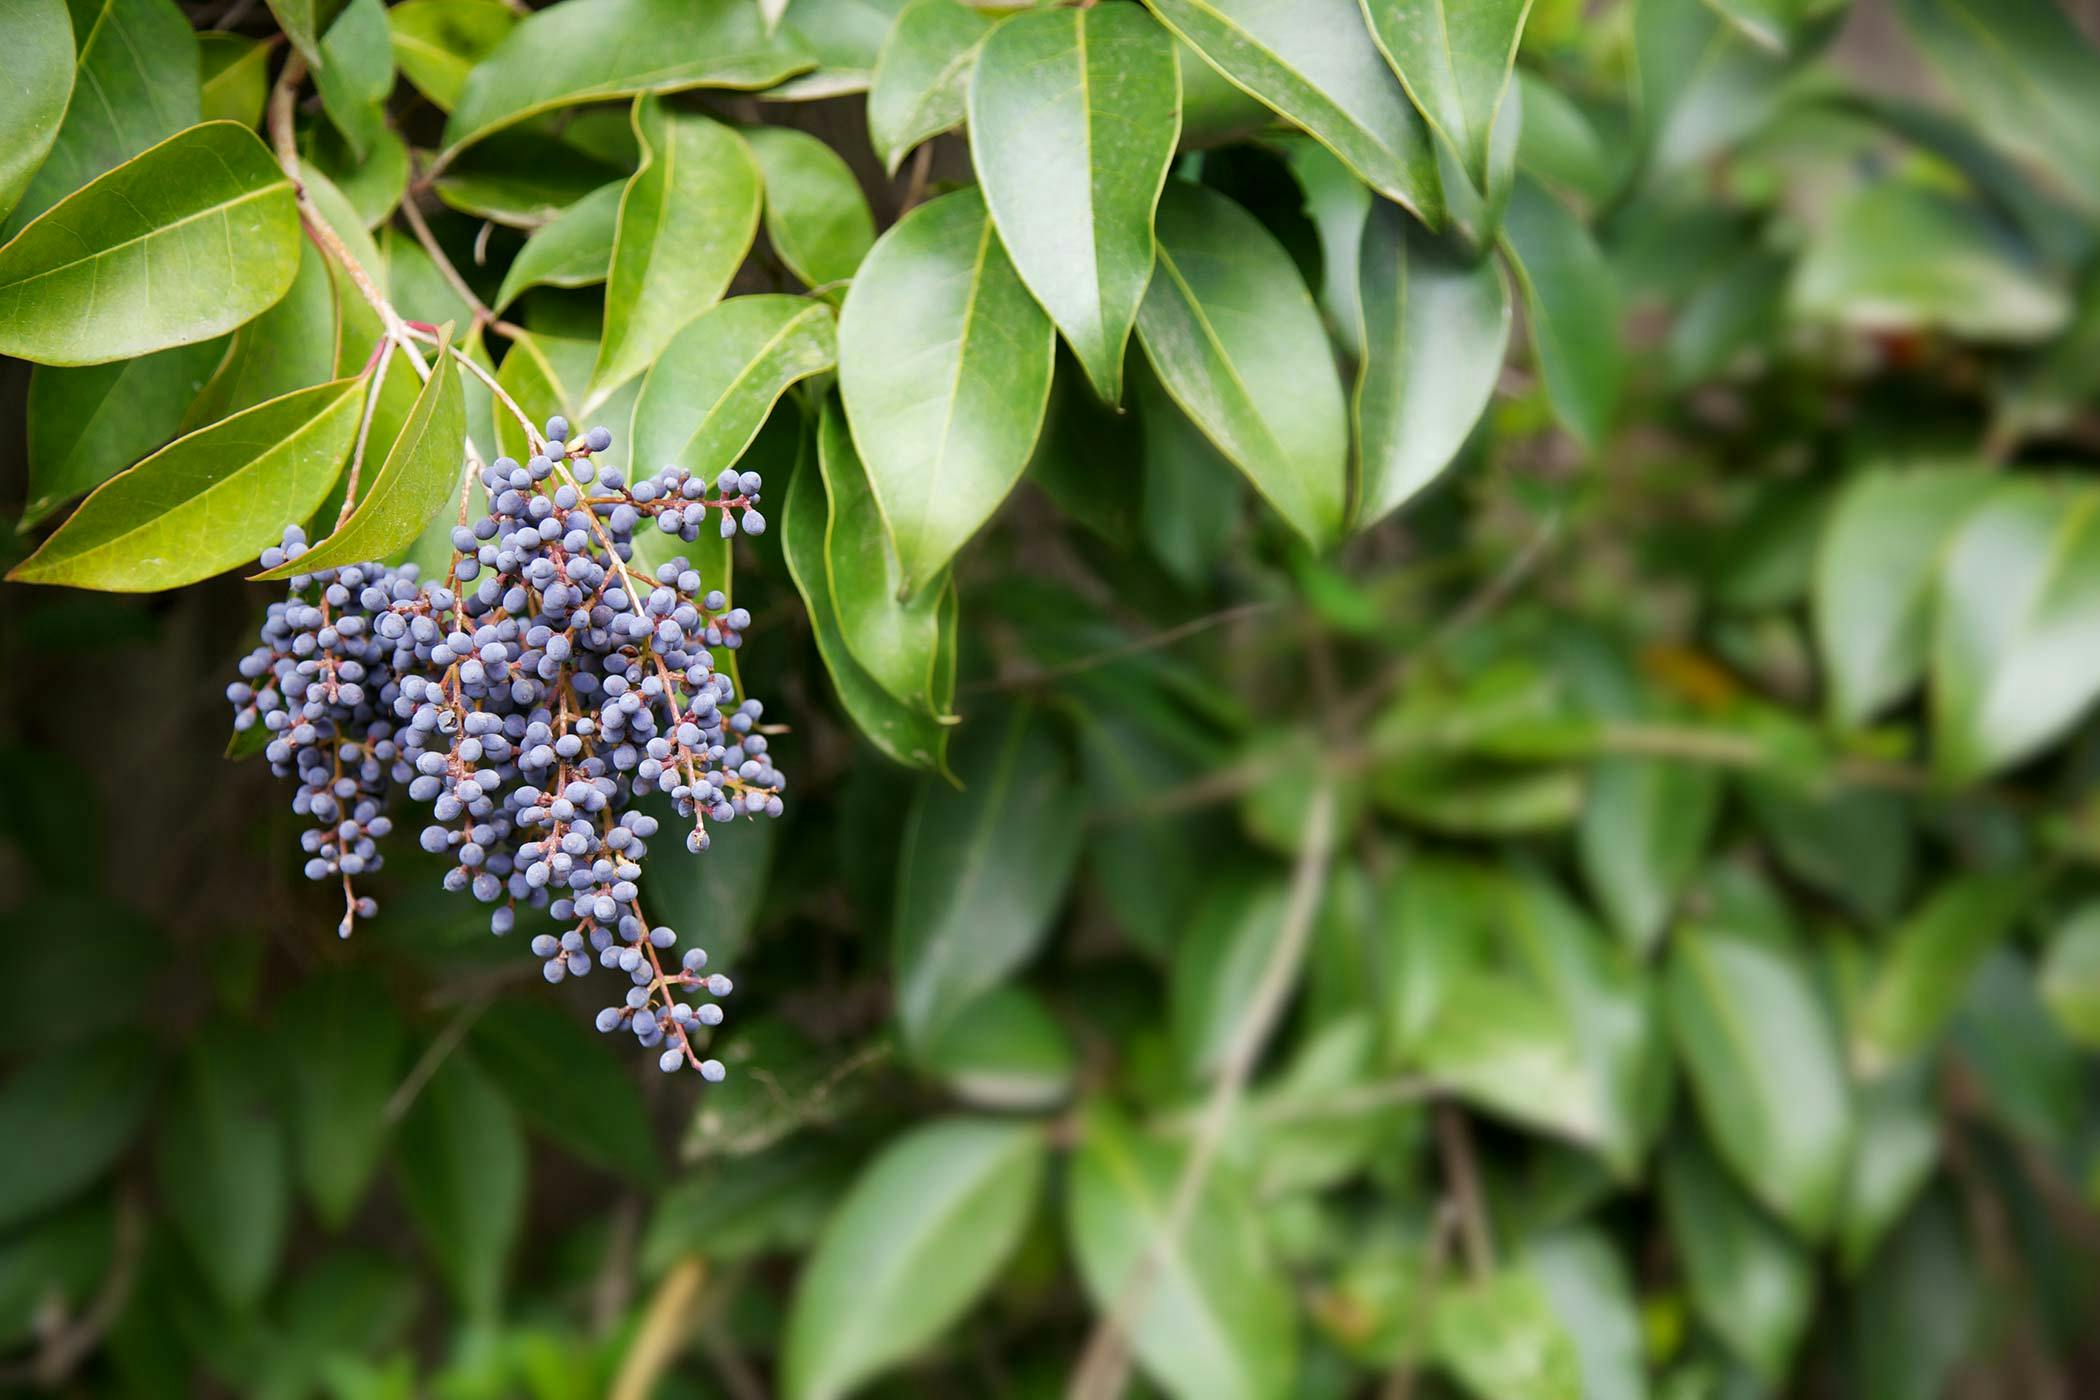 is privet poisonous to dogs